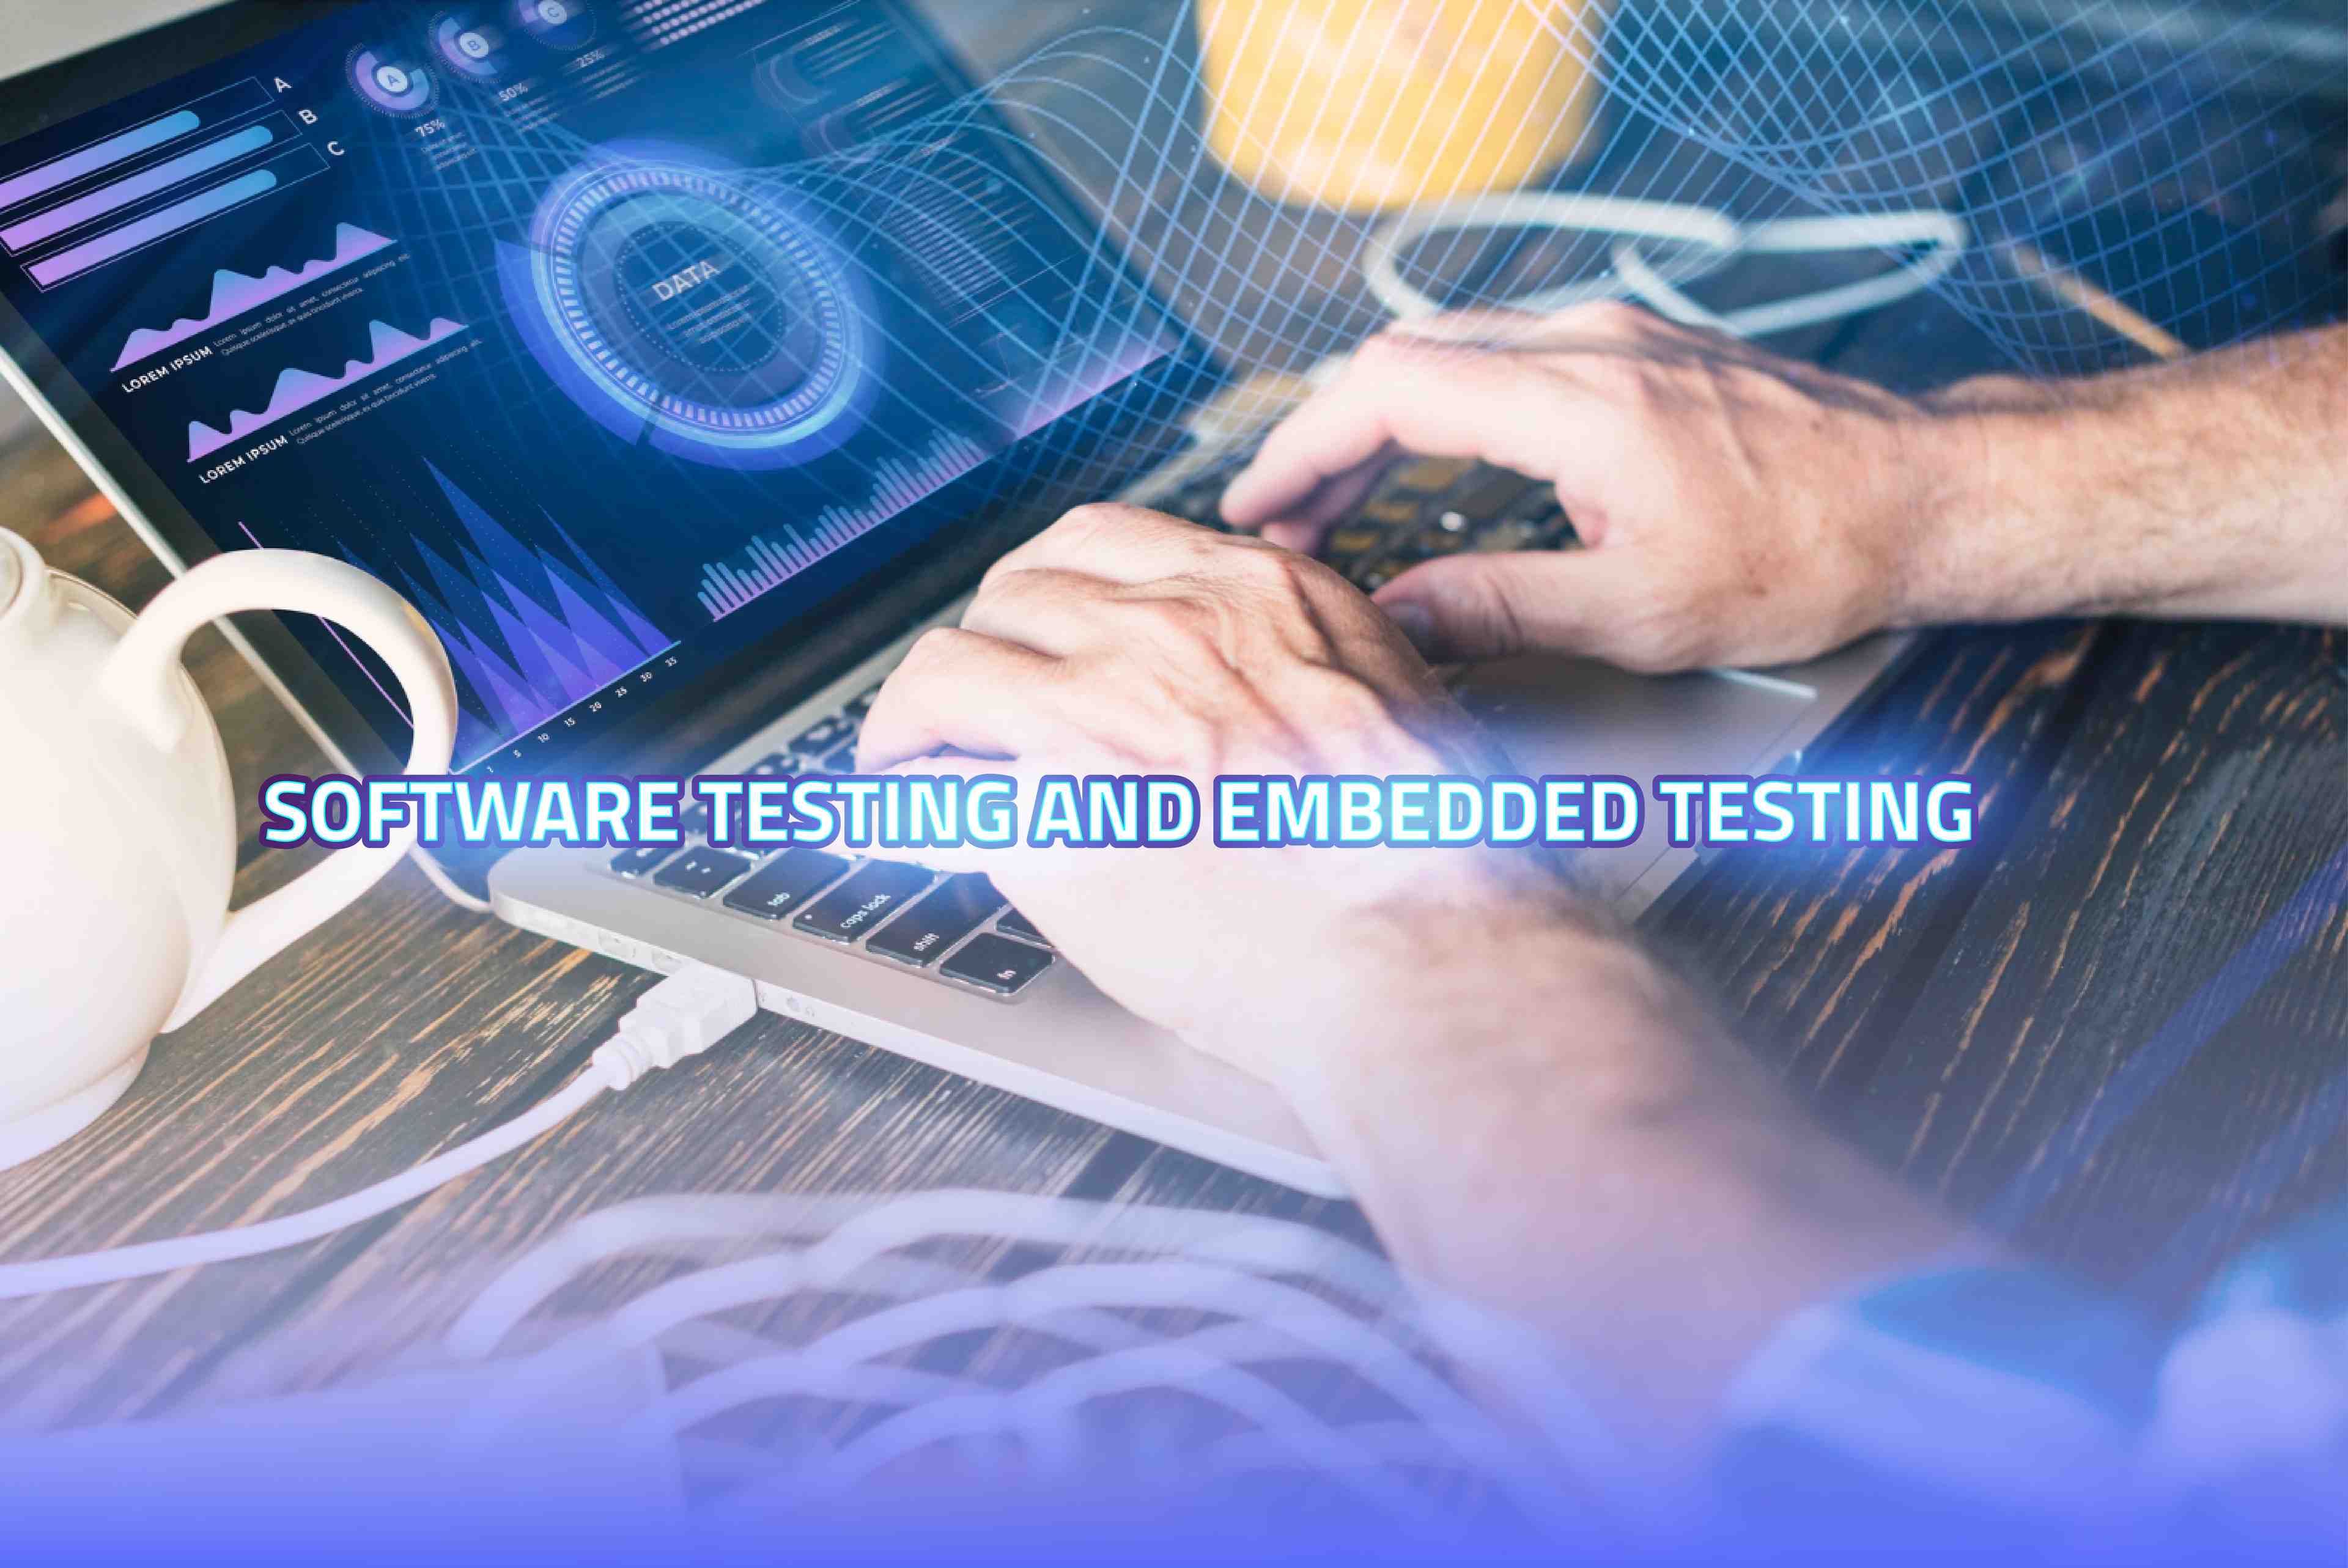 Key Differences Between Software Testing and Embedded Testing